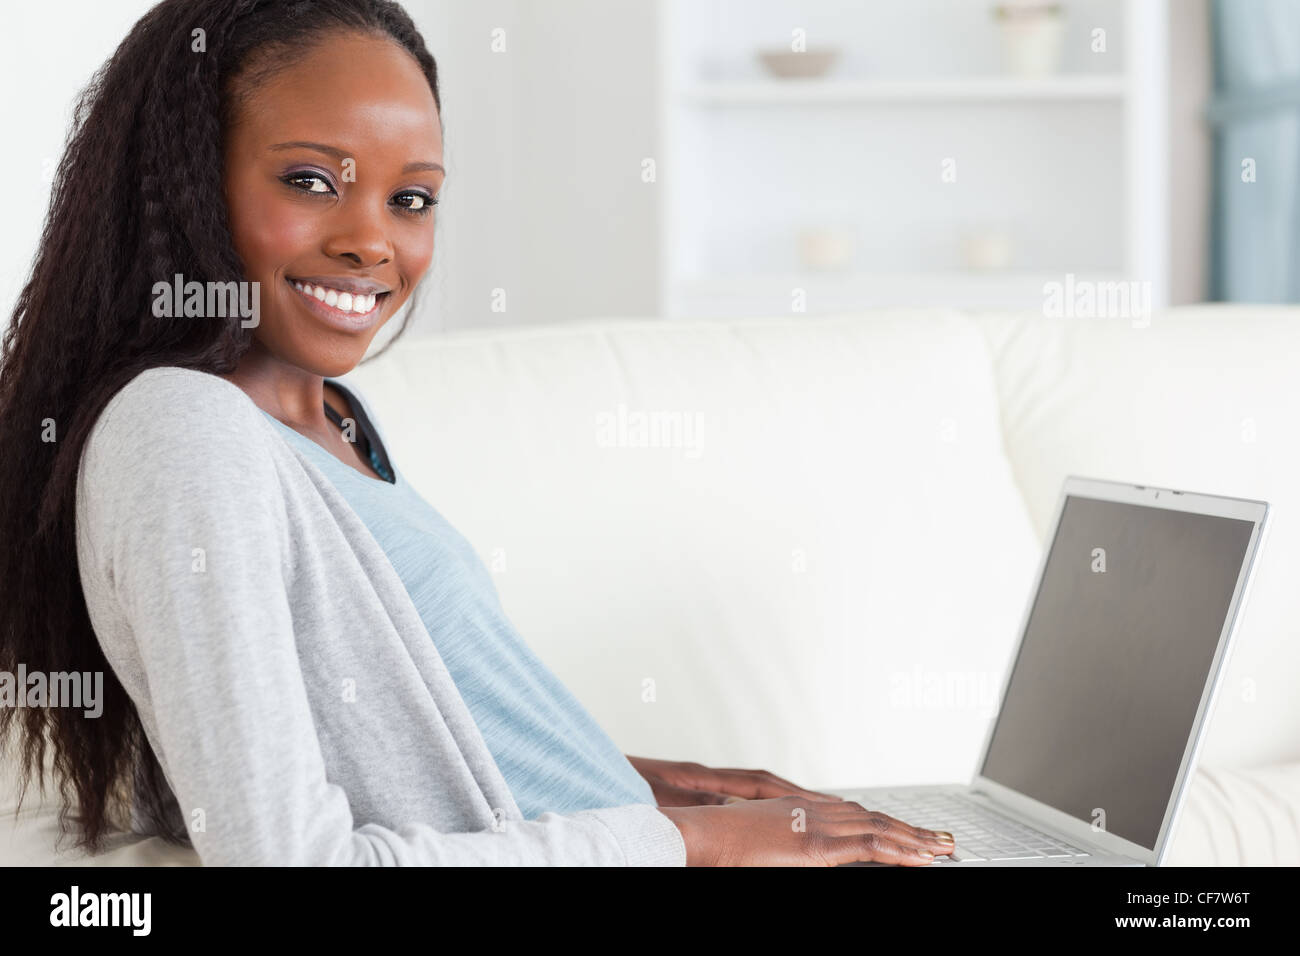 Close up of smiling woman surfing the internet Stock Photo